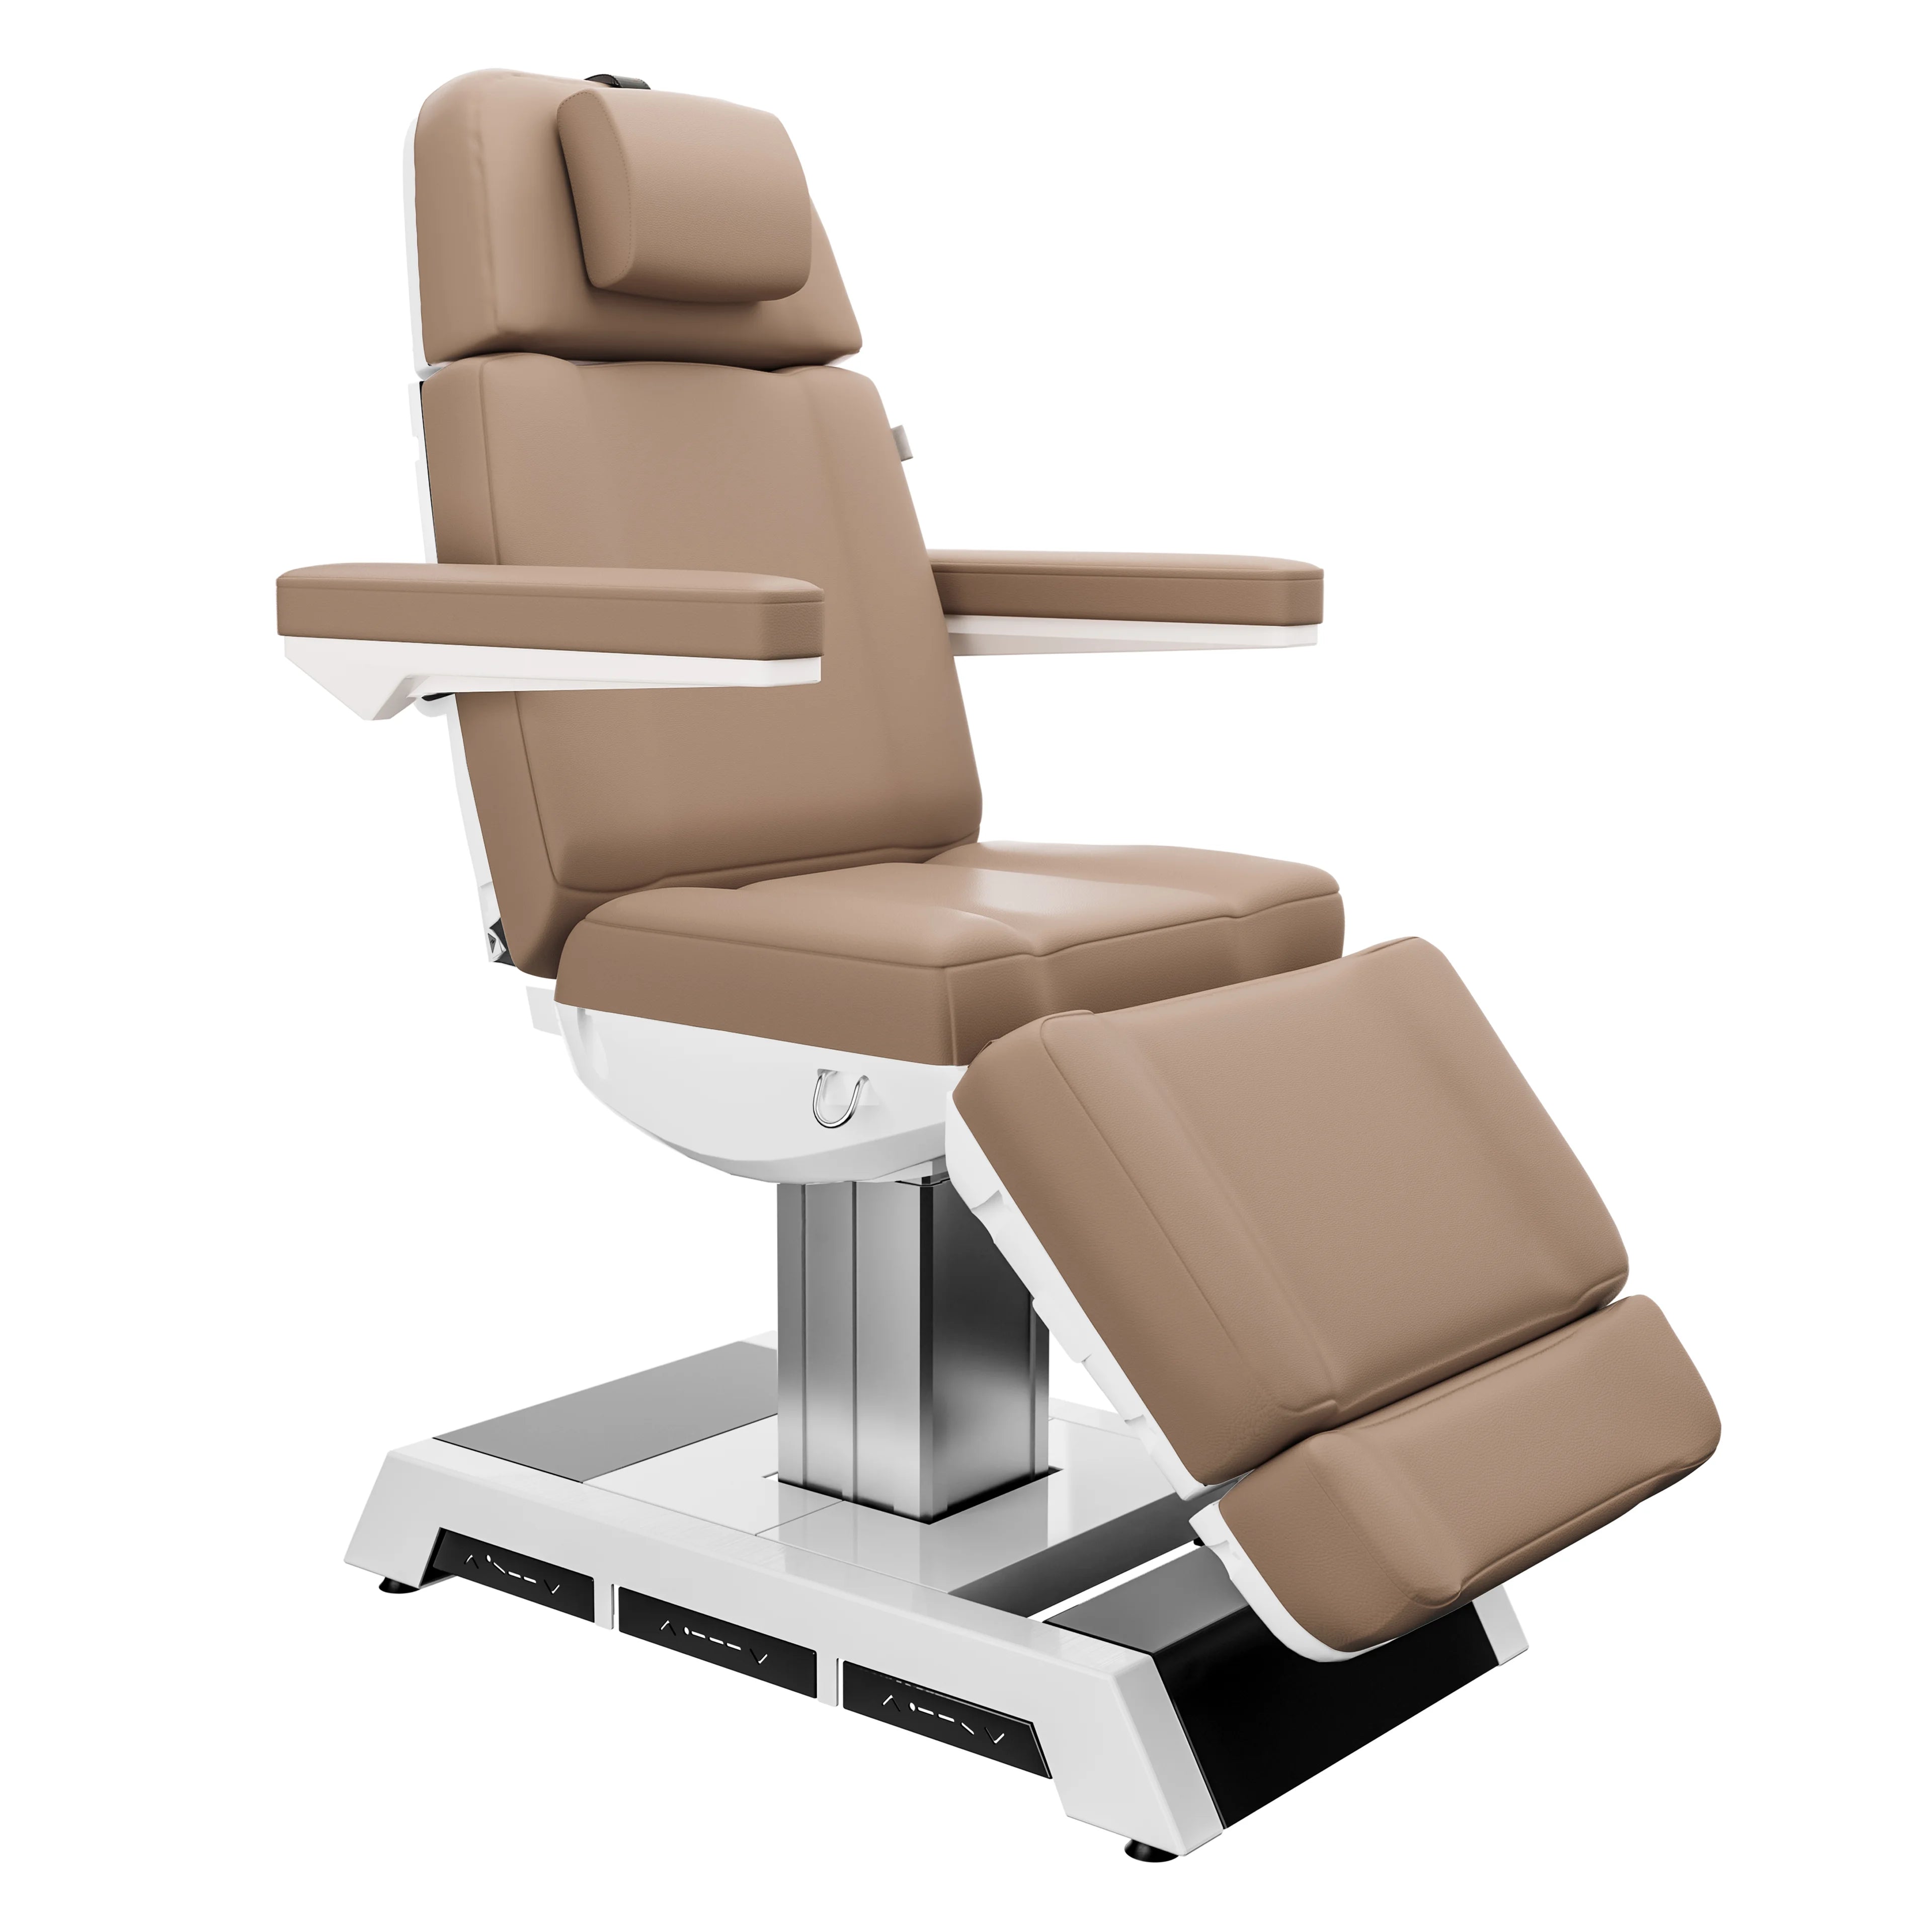 SpaMarc . Adones (Brown) . 4 Motor Spa Treatment Chair/Bed